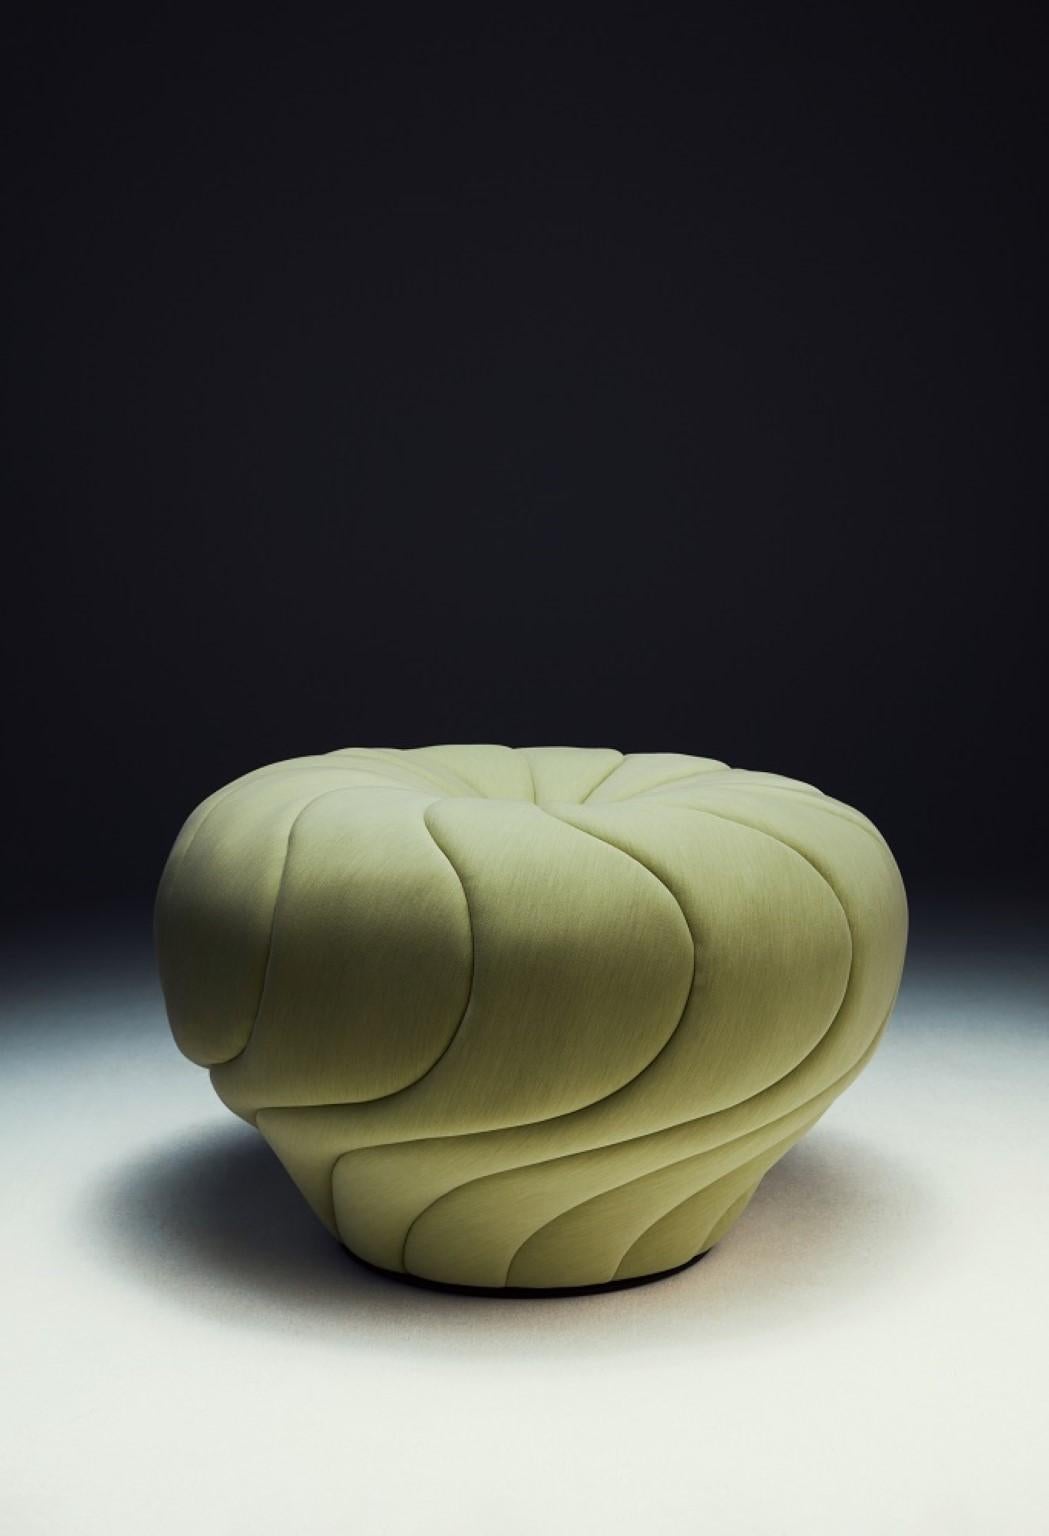 Champignon by Front
Dimensions: W 97 x D 97 x H 70 cm
Materials: Fabric

Drawing inspiration from the surprising and unique shape of mushrooms, Front imagined a strikingly singular pouf design that sprouts from the ground. Sitting on its cap,